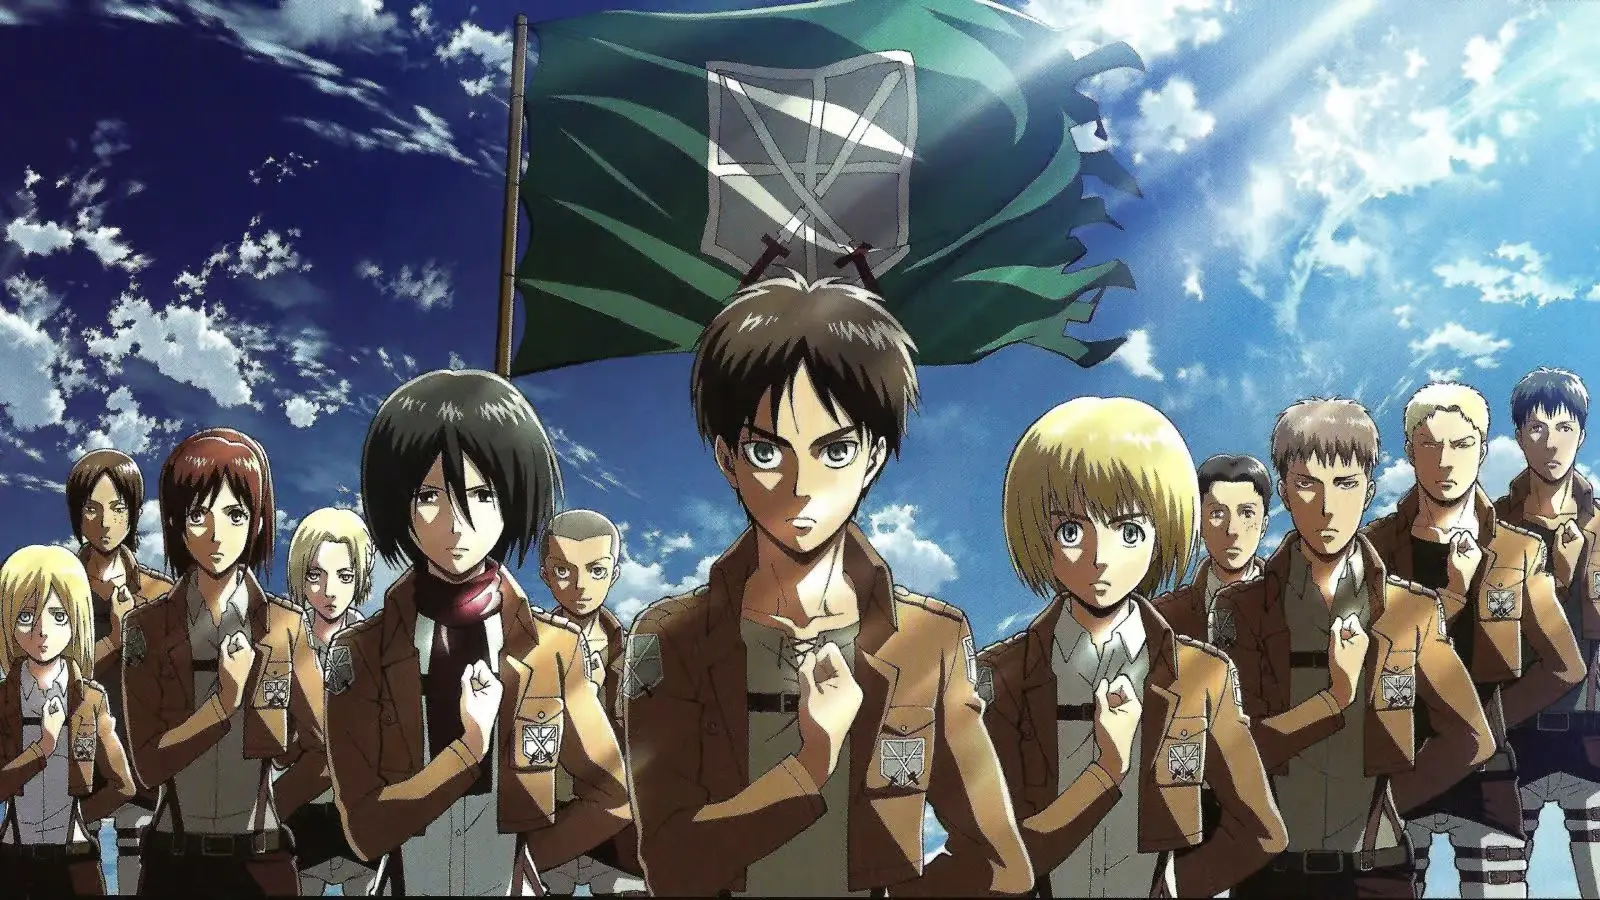 Attack on Titan: Humanity’s Struggle Against the Titans